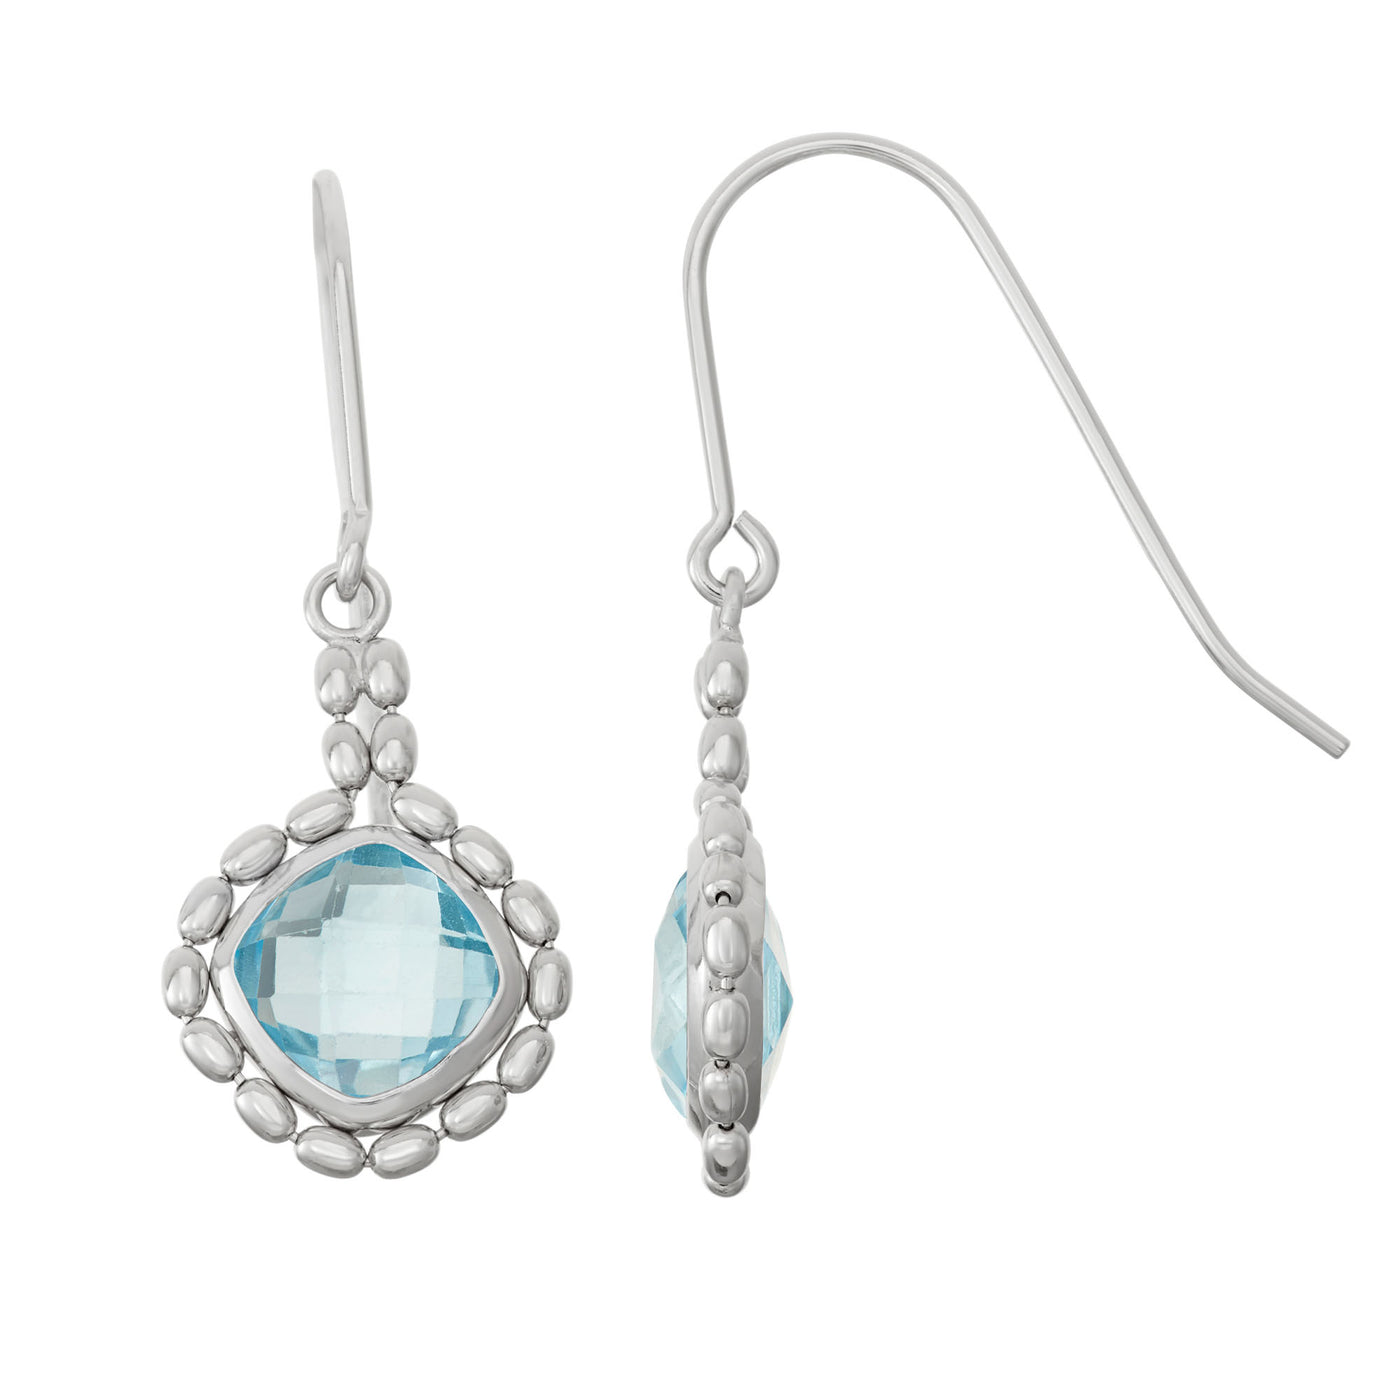 Rebecca Sloane Silver Beads Earring With Blue Topaz Square Stone